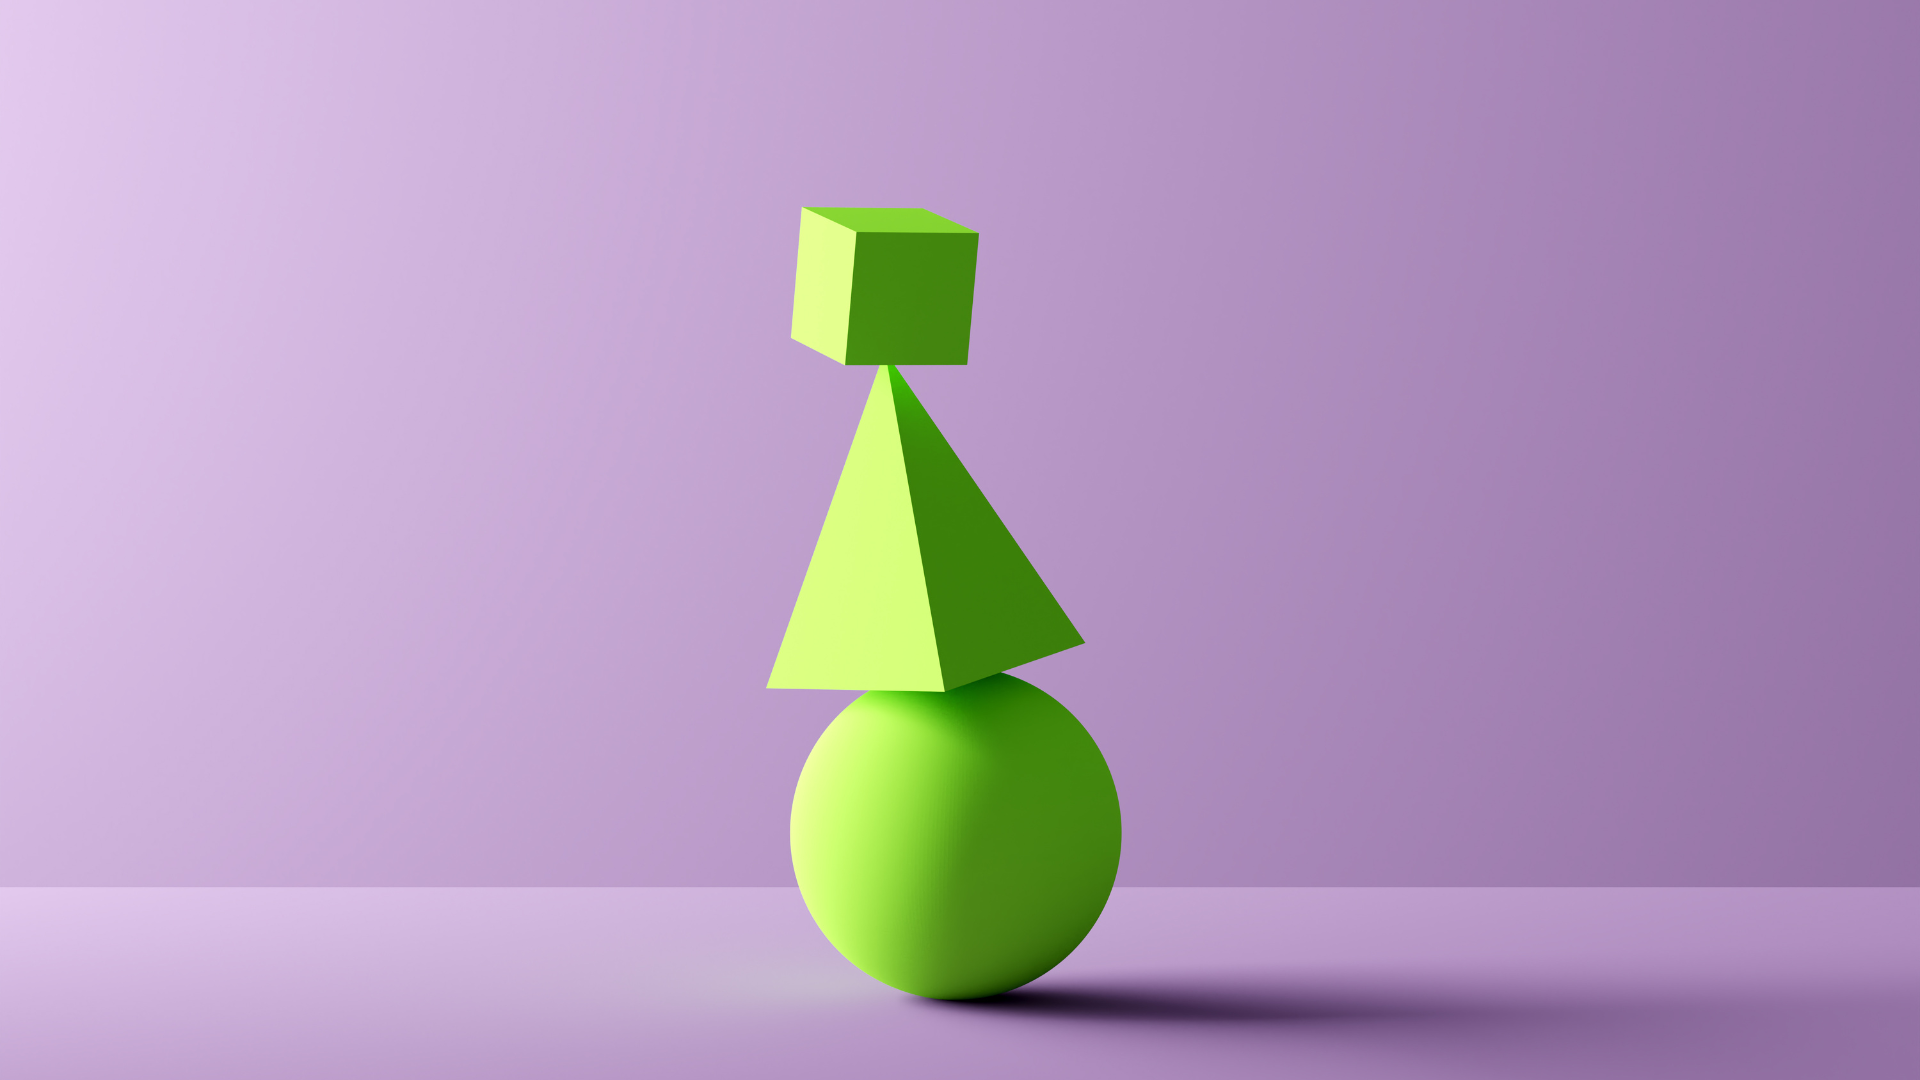 Three neon green 3-dimensional geometric blocks stacked on top of one another in a balancing act — a circle at the base, a triangle in the middle and a cube balancing on the top. The color pops on the purple backdrop.